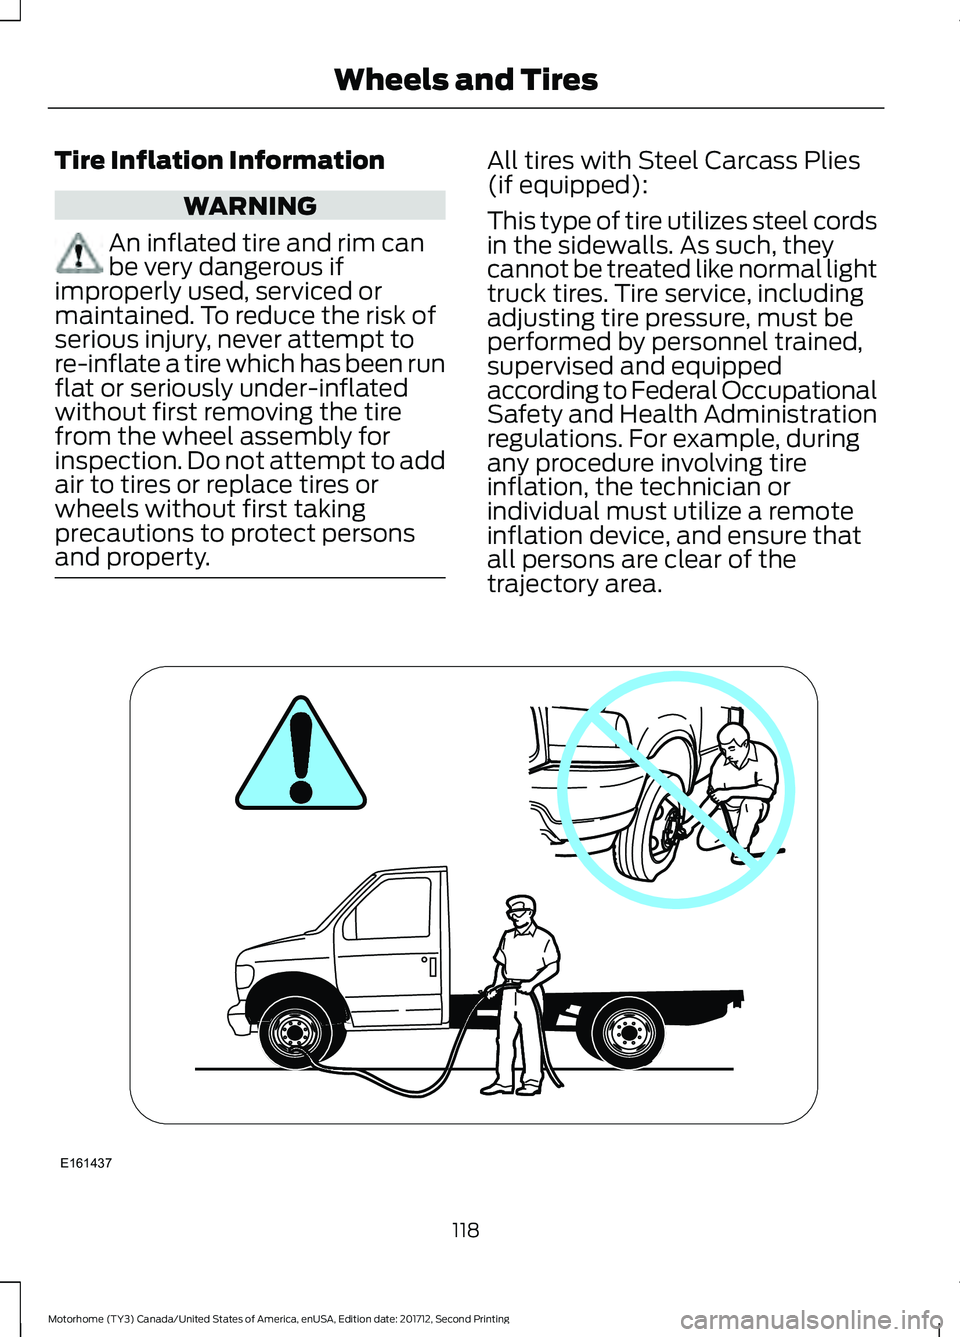 FORD F-53 2018  Owners Manual Tire Inflation Information
WARNING
An inflated tire and rim can
be very dangerous if
improperly used, serviced or
maintained. To reduce the risk of
serious injury, never attempt to
re-inflate a tire w